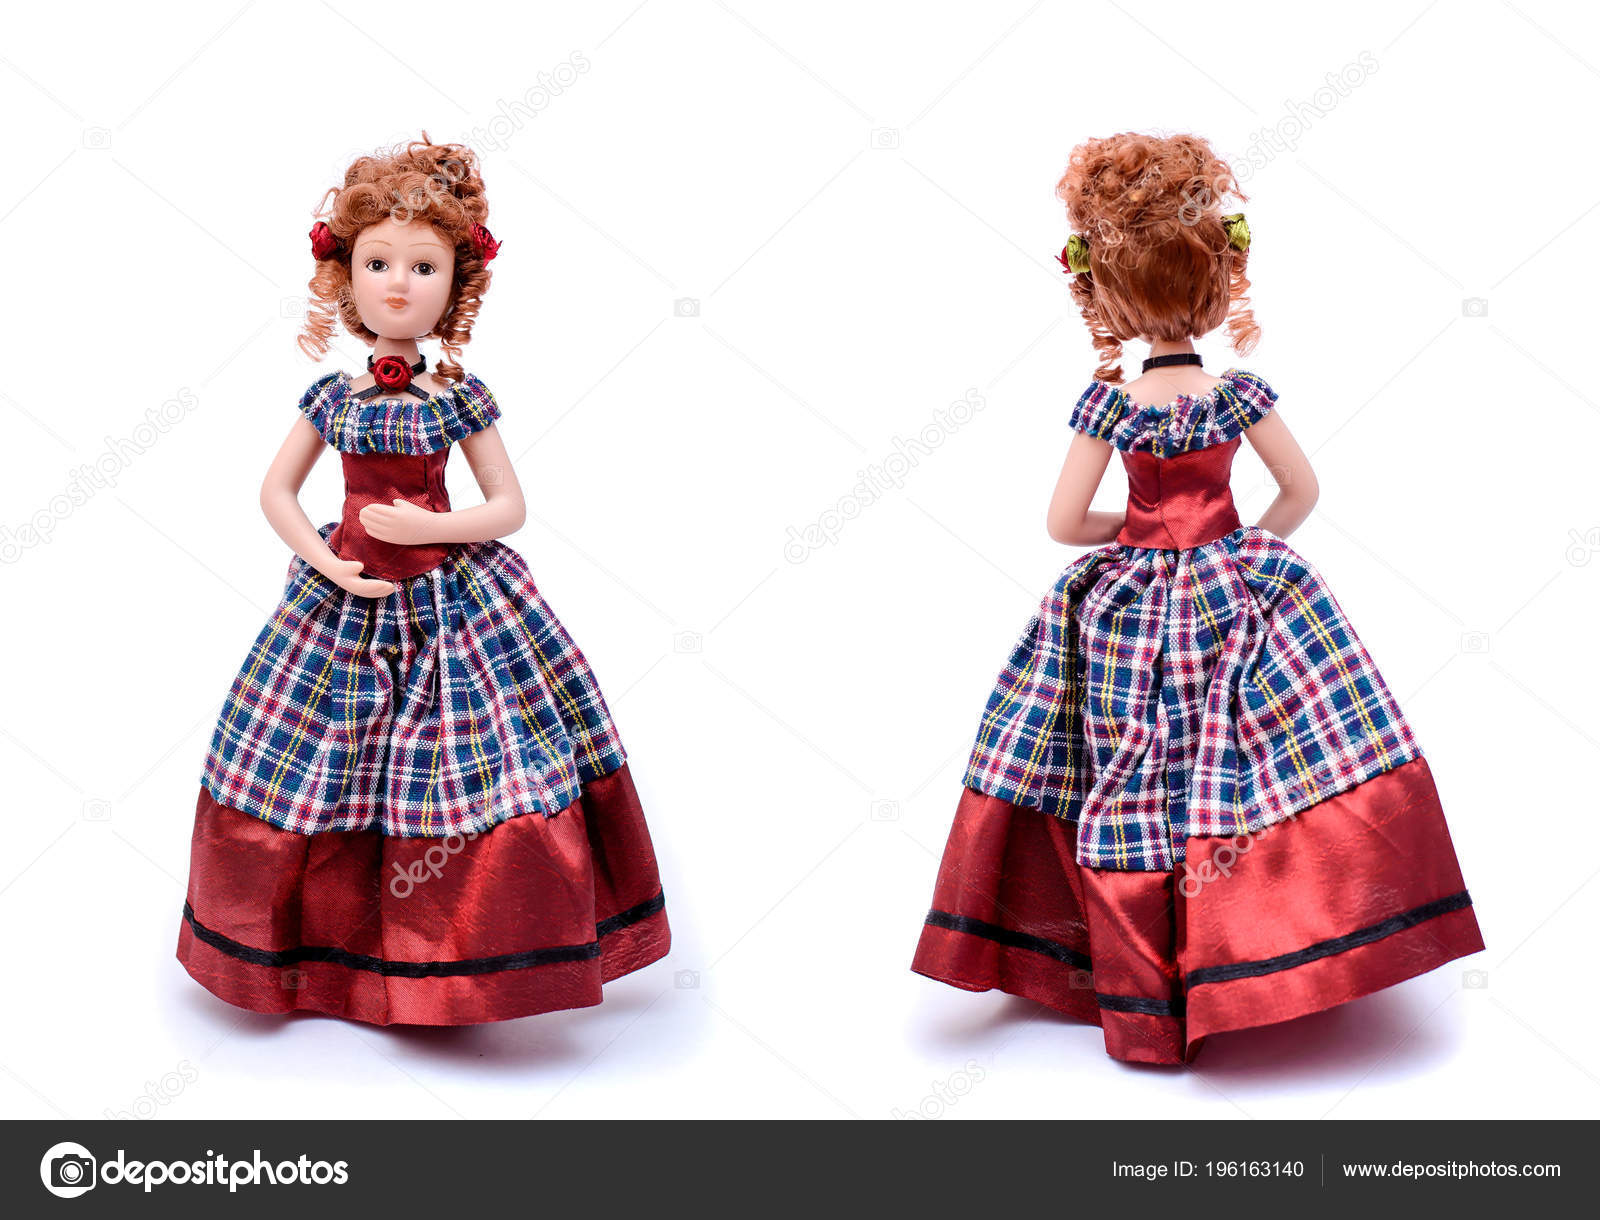 Beautiful Porcelain Doll Red Curly Hair Hairstyle Vintage